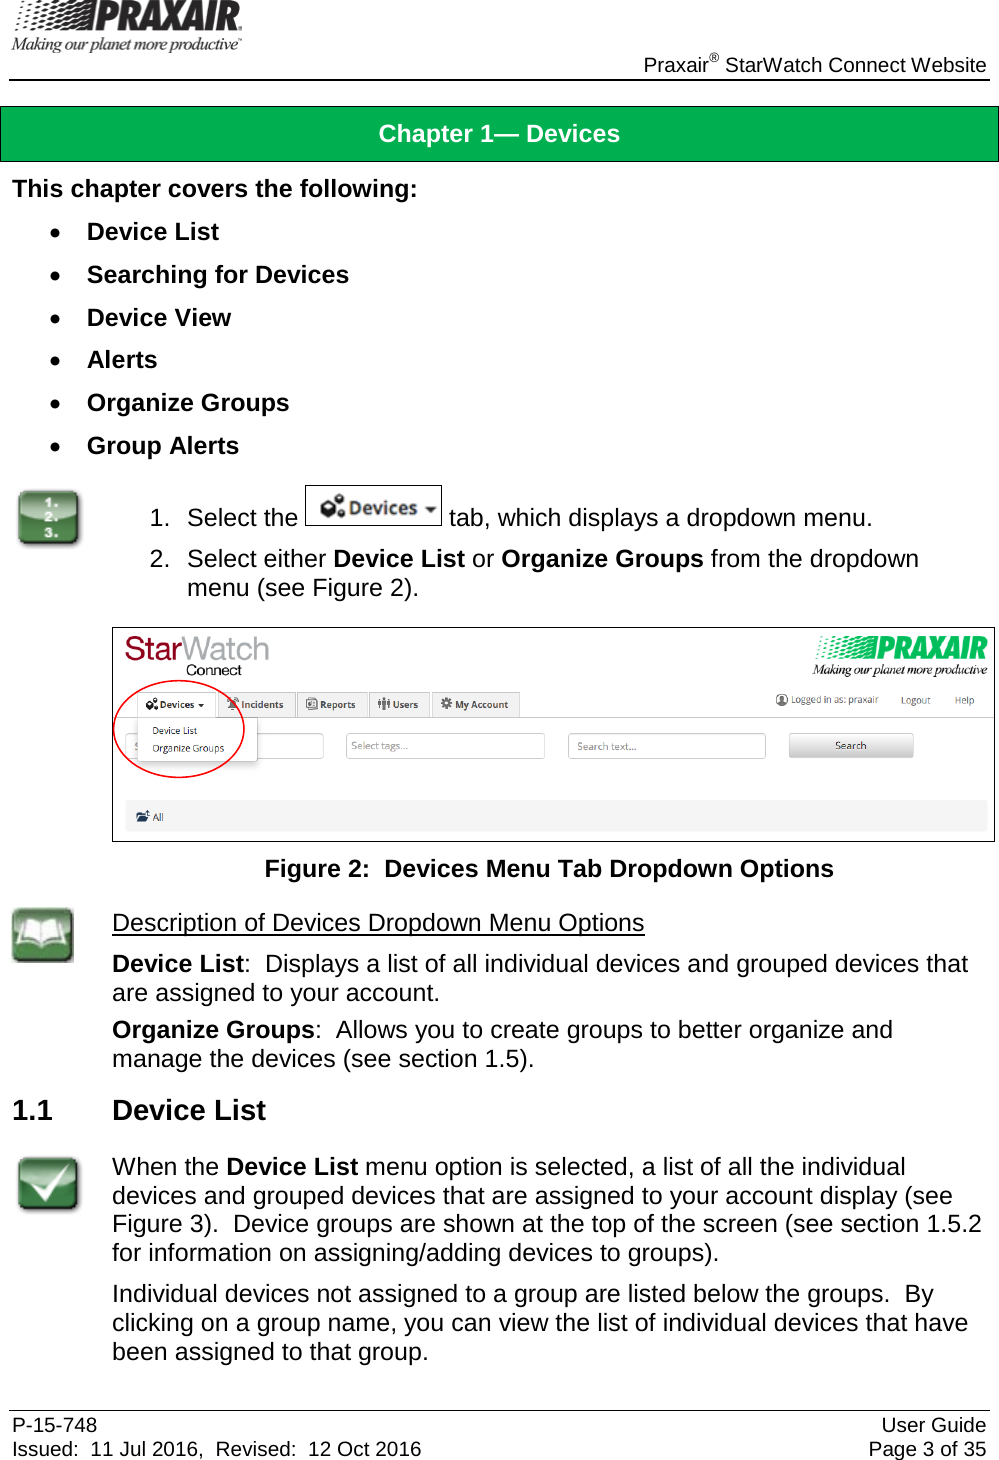    Praxair® StarWatch Connect Website P-15-748 User Guide Issued:  11 Jul 2016,  Revised:  12 Oct 2016 Page 3 of 35 Chapter 1— Devices This chapter covers the following: • Device List • Searching for Devices • Device View • Alerts • Organize Groups • Group Alerts  1. Select the   tab, which displays a dropdown menu.   2.  Select either Device List or Organize Groups from the dropdown menu (see Figure 2).   Figure 2:  Devices Menu Tab Dropdown Options  Description of Devices Dropdown Menu Options Device List:  Displays a list of all individual devices and grouped devices that are assigned to your account. Organize Groups:  Allows you to create groups to better organize and manage the devices (see section 1.5). 1.1 Device List  When the Device List menu option is selected, a list of all the individual devices and grouped devices that are assigned to your account display (see Figure 3).  Device groups are shown at the top of the screen (see section 1.5.2 for information on assigning/adding devices to groups).   Individual devices not assigned to a group are listed below the groups.  By clicking on a group name, you can view the list of individual devices that have been assigned to that group.   